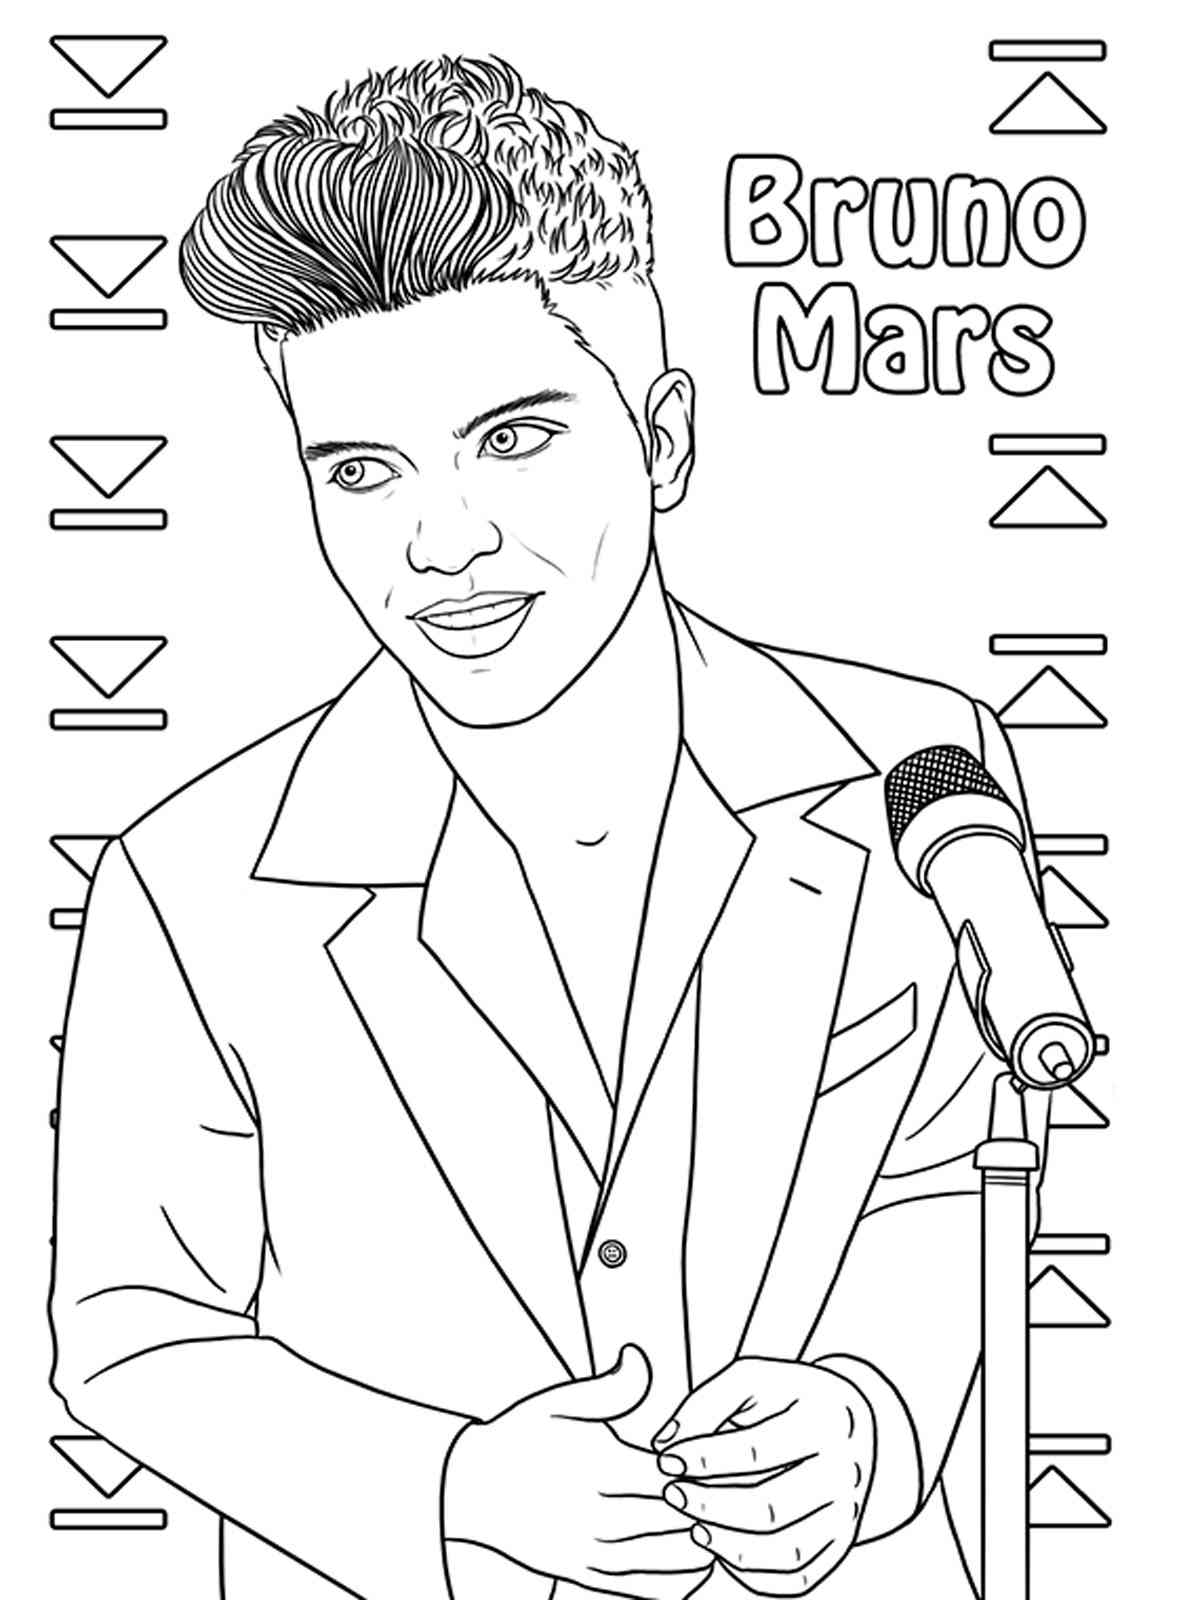 Bruno mars coloring pages